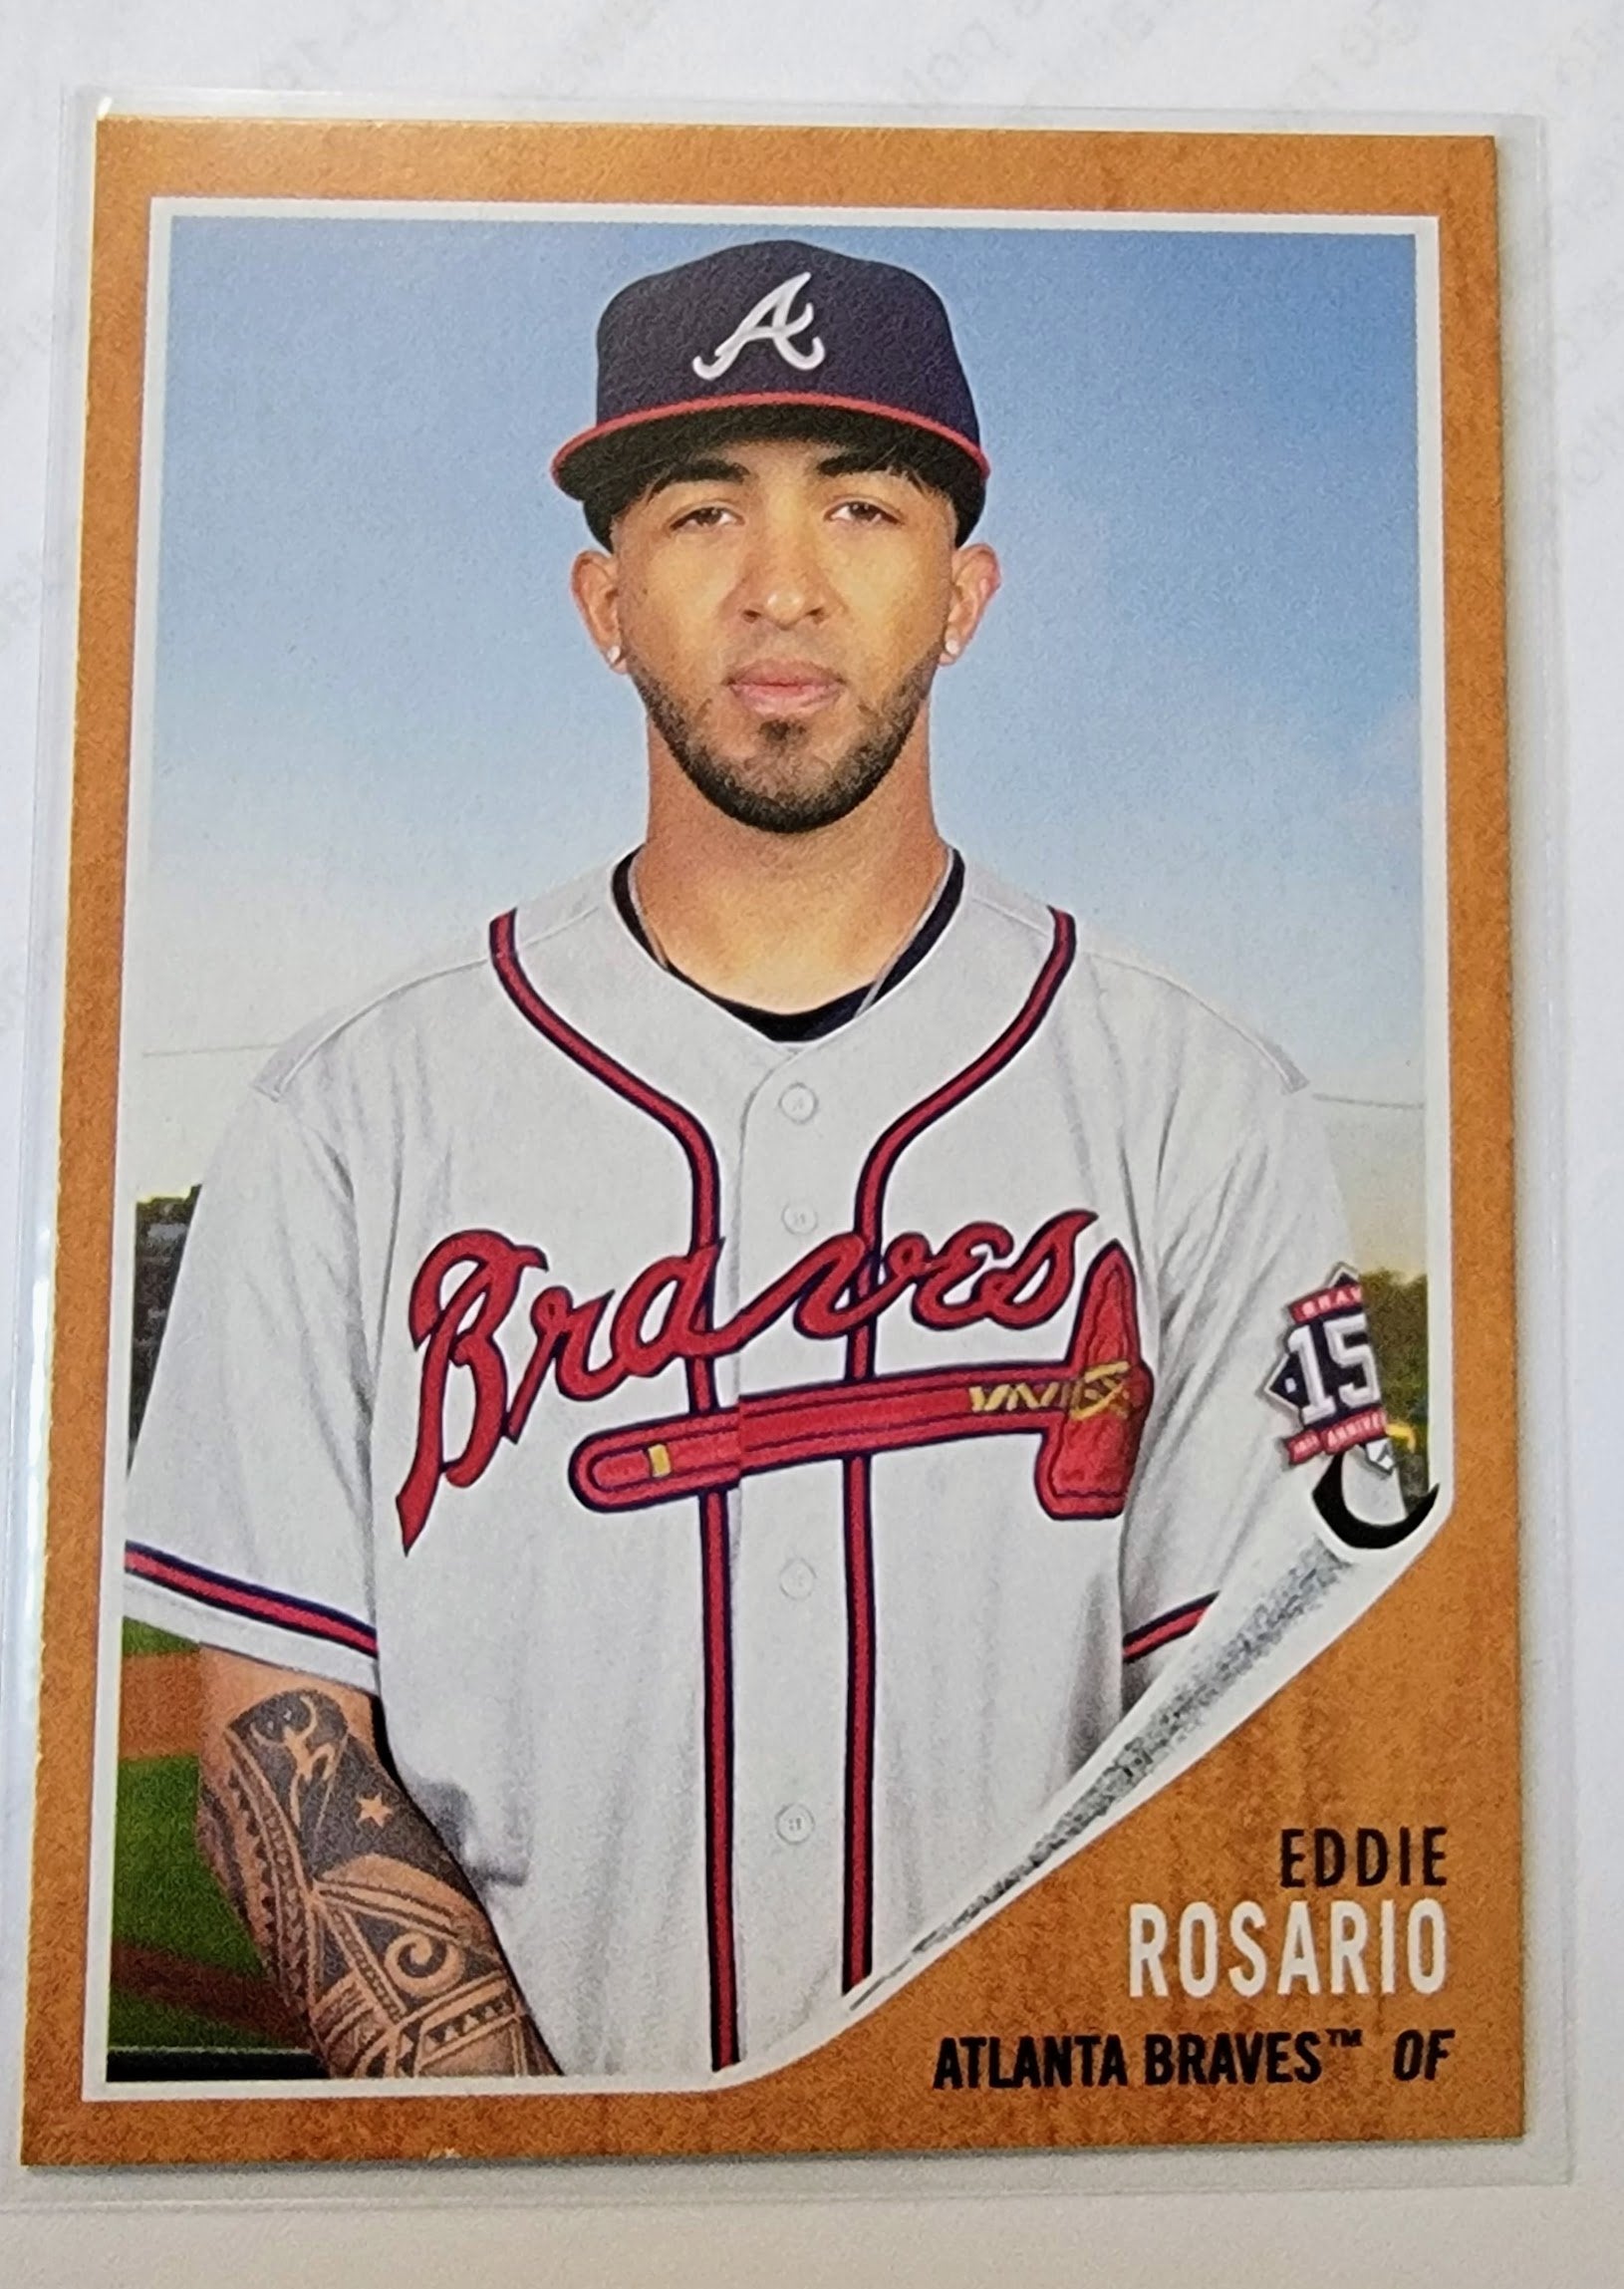 2021 Topps Archives Eddie Rosario 1962 Baseball Trading Card SMCB1 simple Xclusive Collectibles   